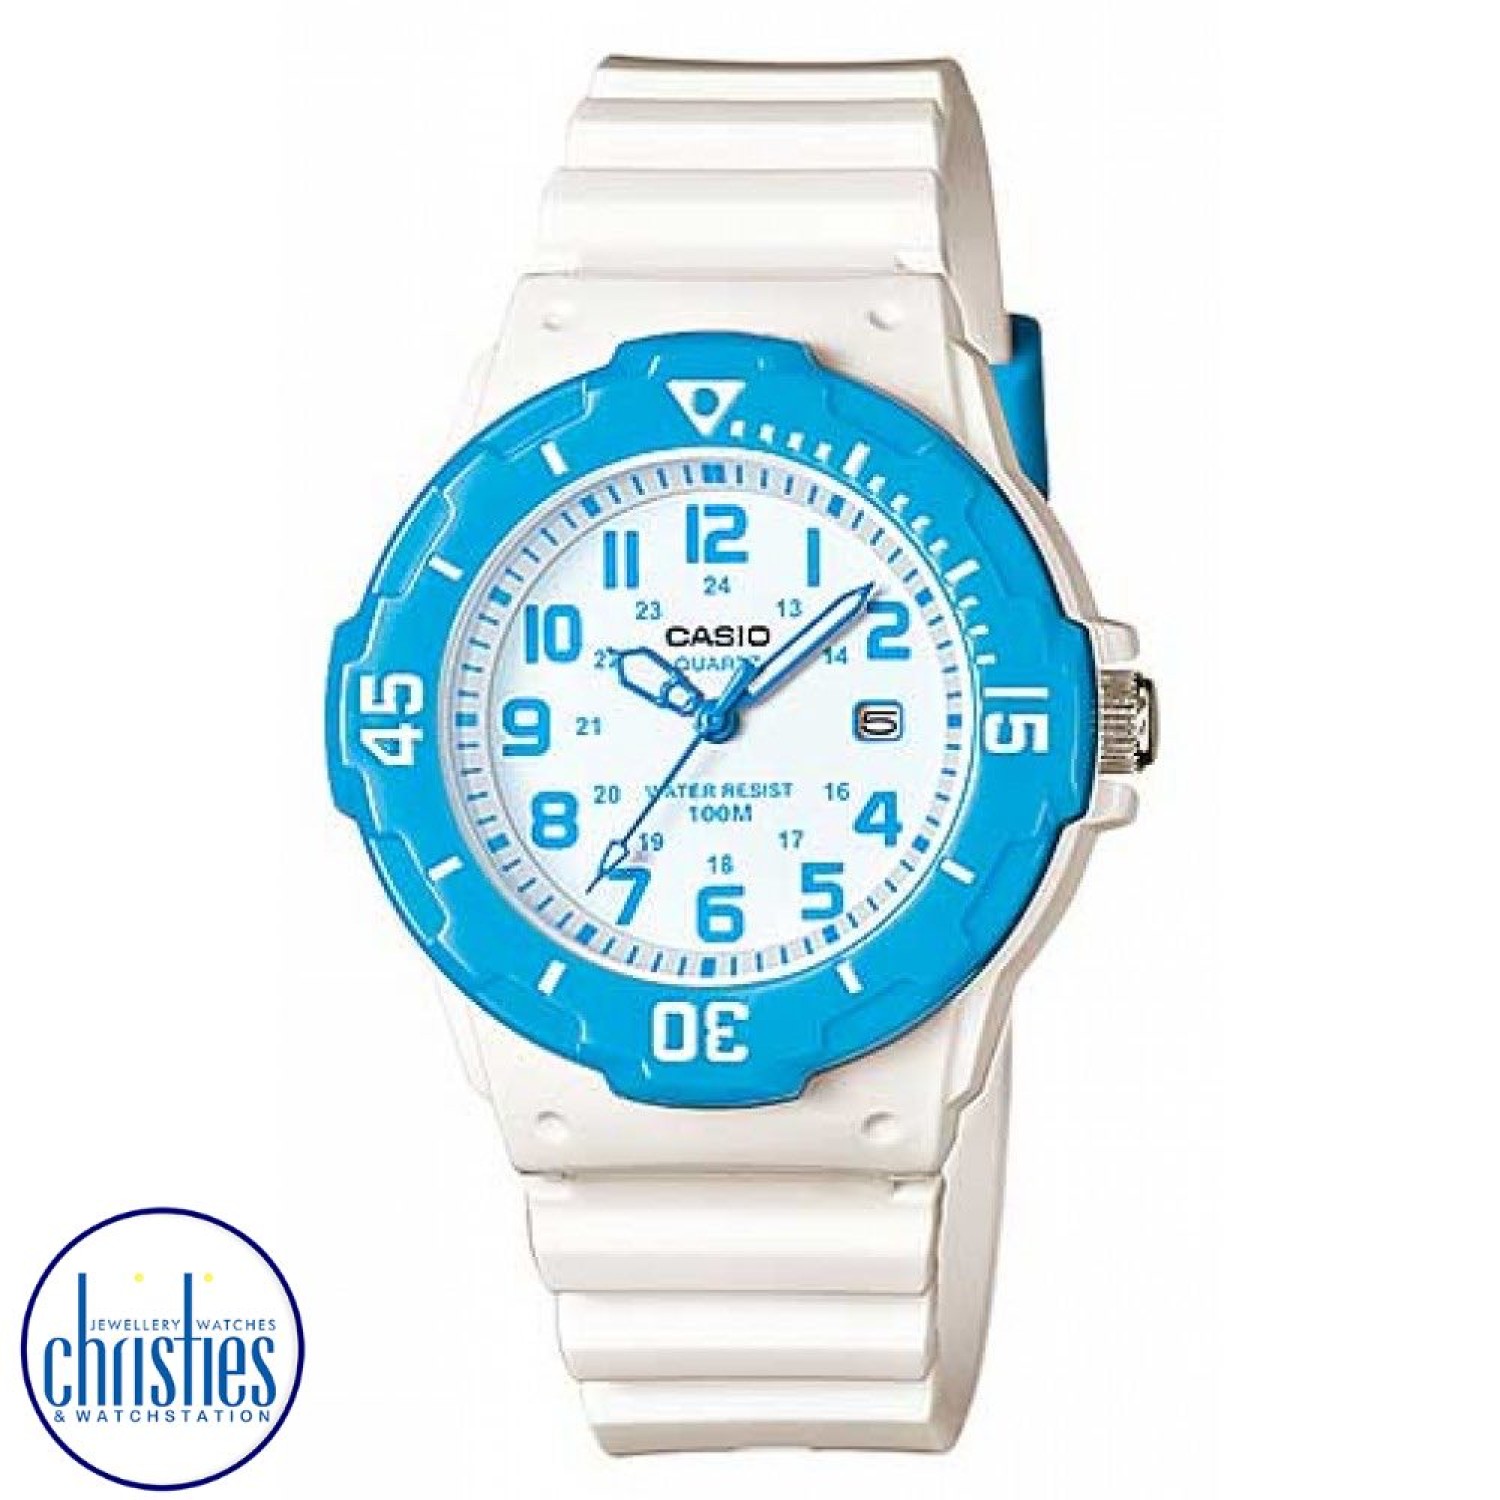 LRW200H-2B Casio 100 Metres Water Resist Watch. Simple and compact, these dive inspired ladies and childrens 3-hand analog timepieces feature 100M water resistance, a bi-directional rotating bezel and date display. Gloss white resin band analog watch with